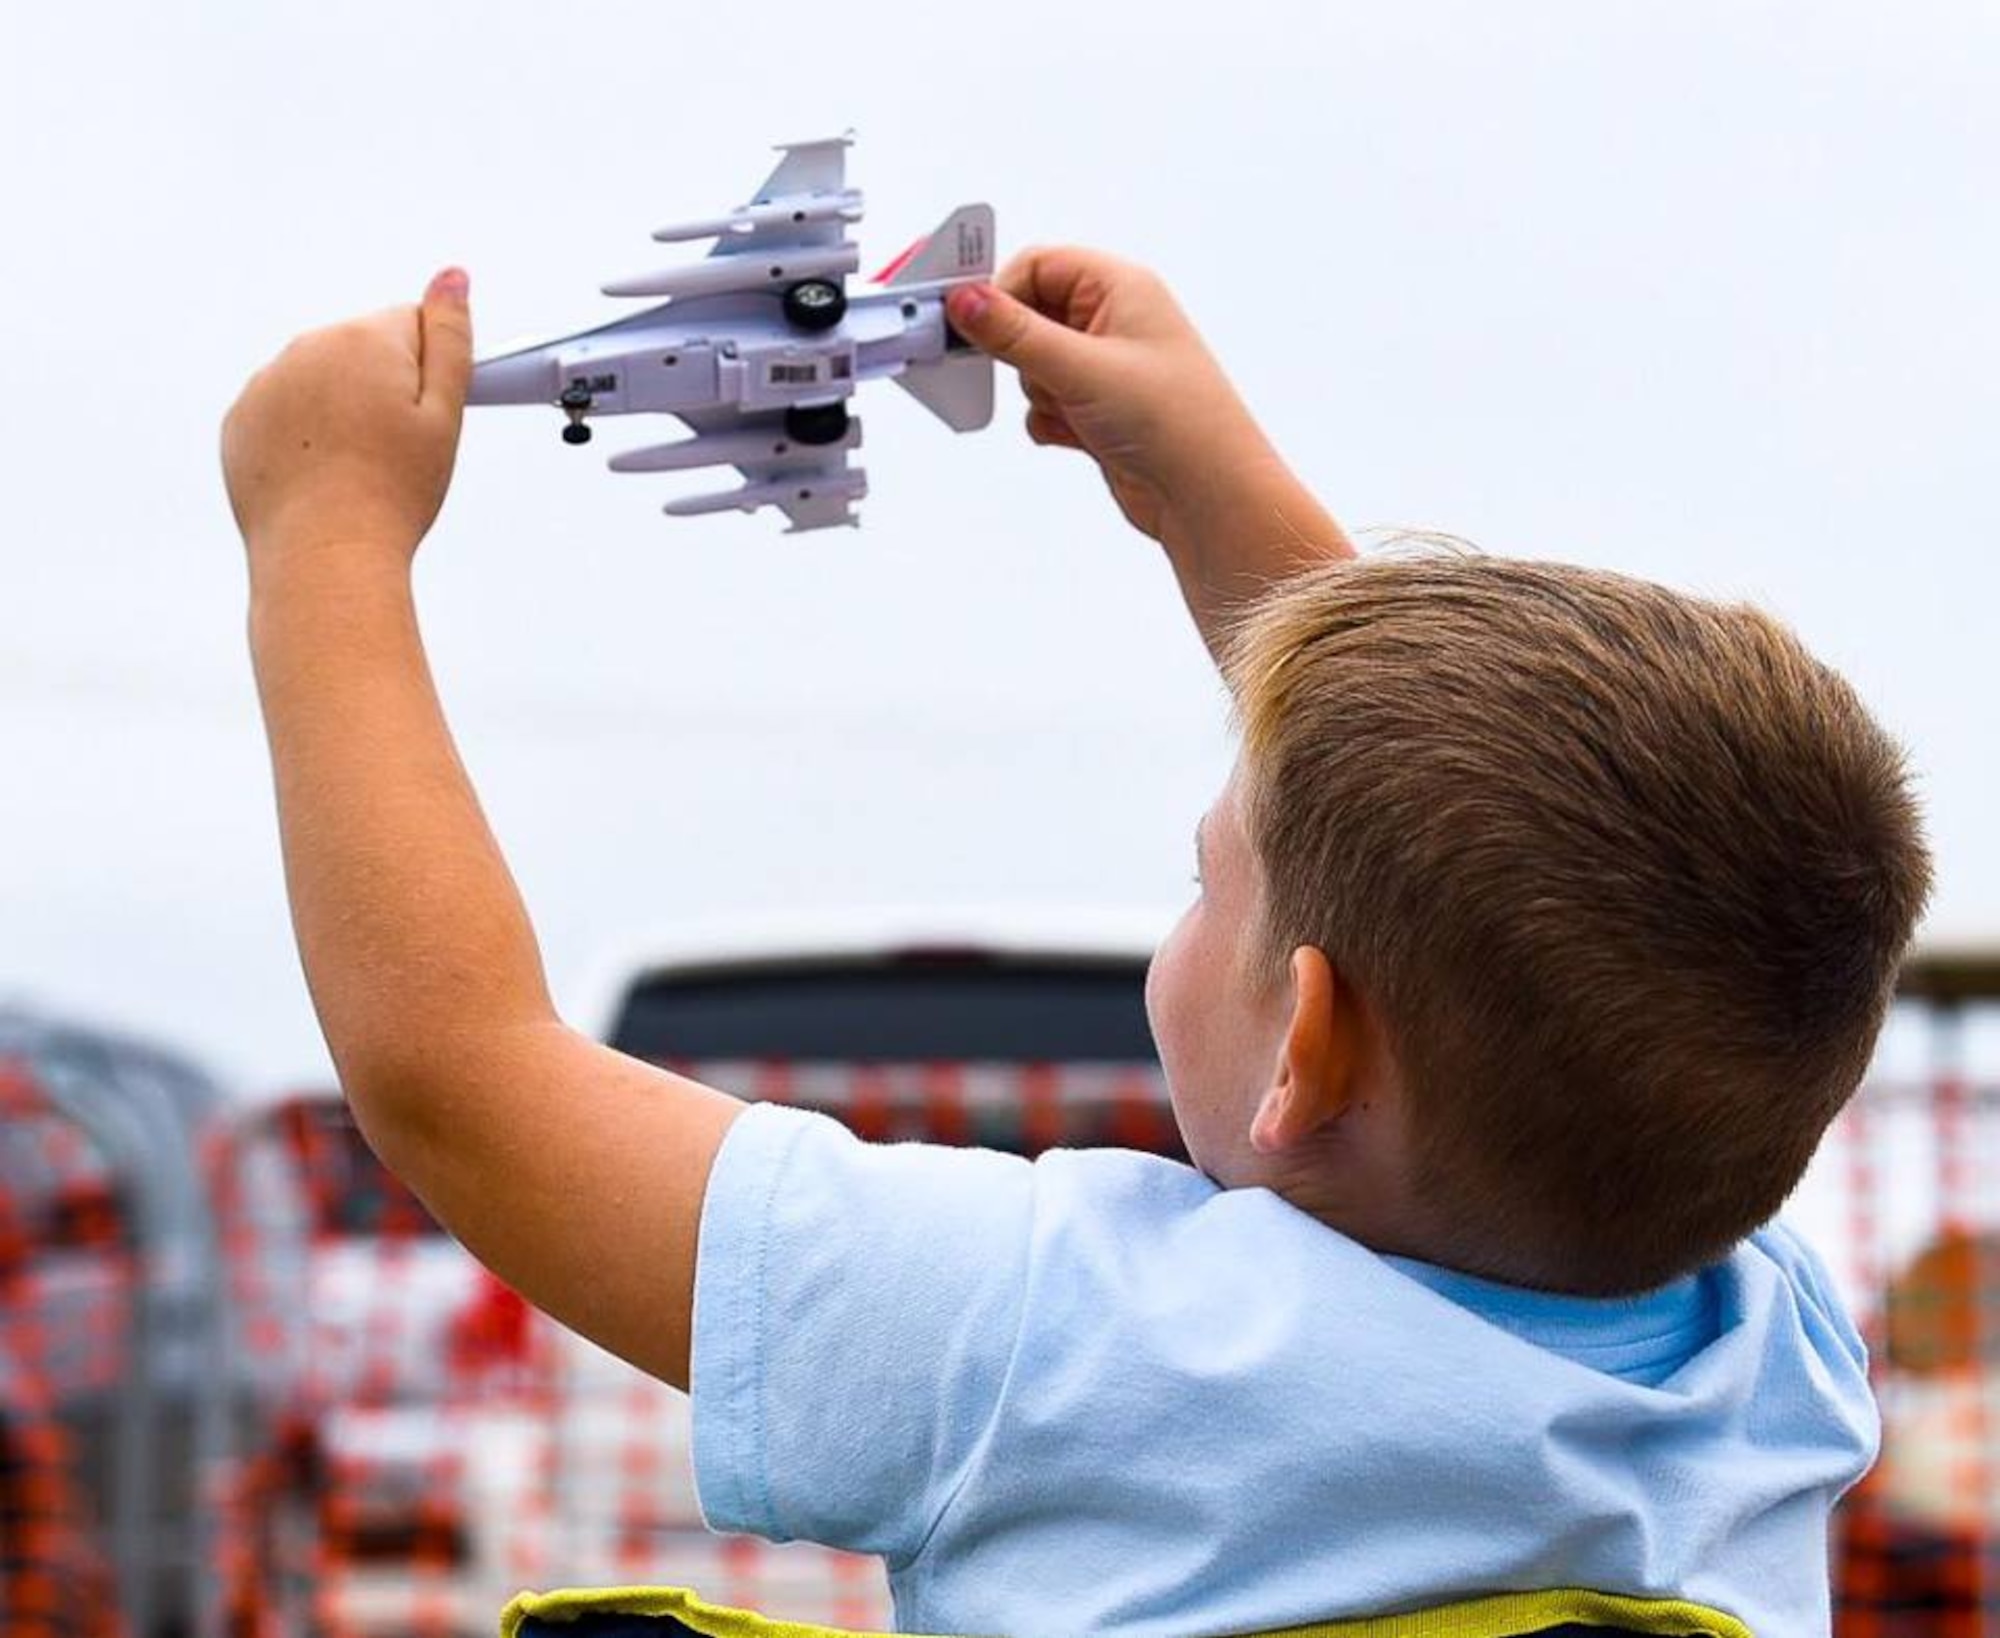 A child mocks aerial performances with a toy airplane during the Frontiers in Flight Open House and Air Show Sept. 8, 2018, at McConnell Air Force Base, Kansas. The event showcased aerobatic performances, static airplane displays, science, technology, engineering and match exhibits and a kids’ zone. (U.S. Air Force photo by Airman 1st Class Michaela R. Slanchik)